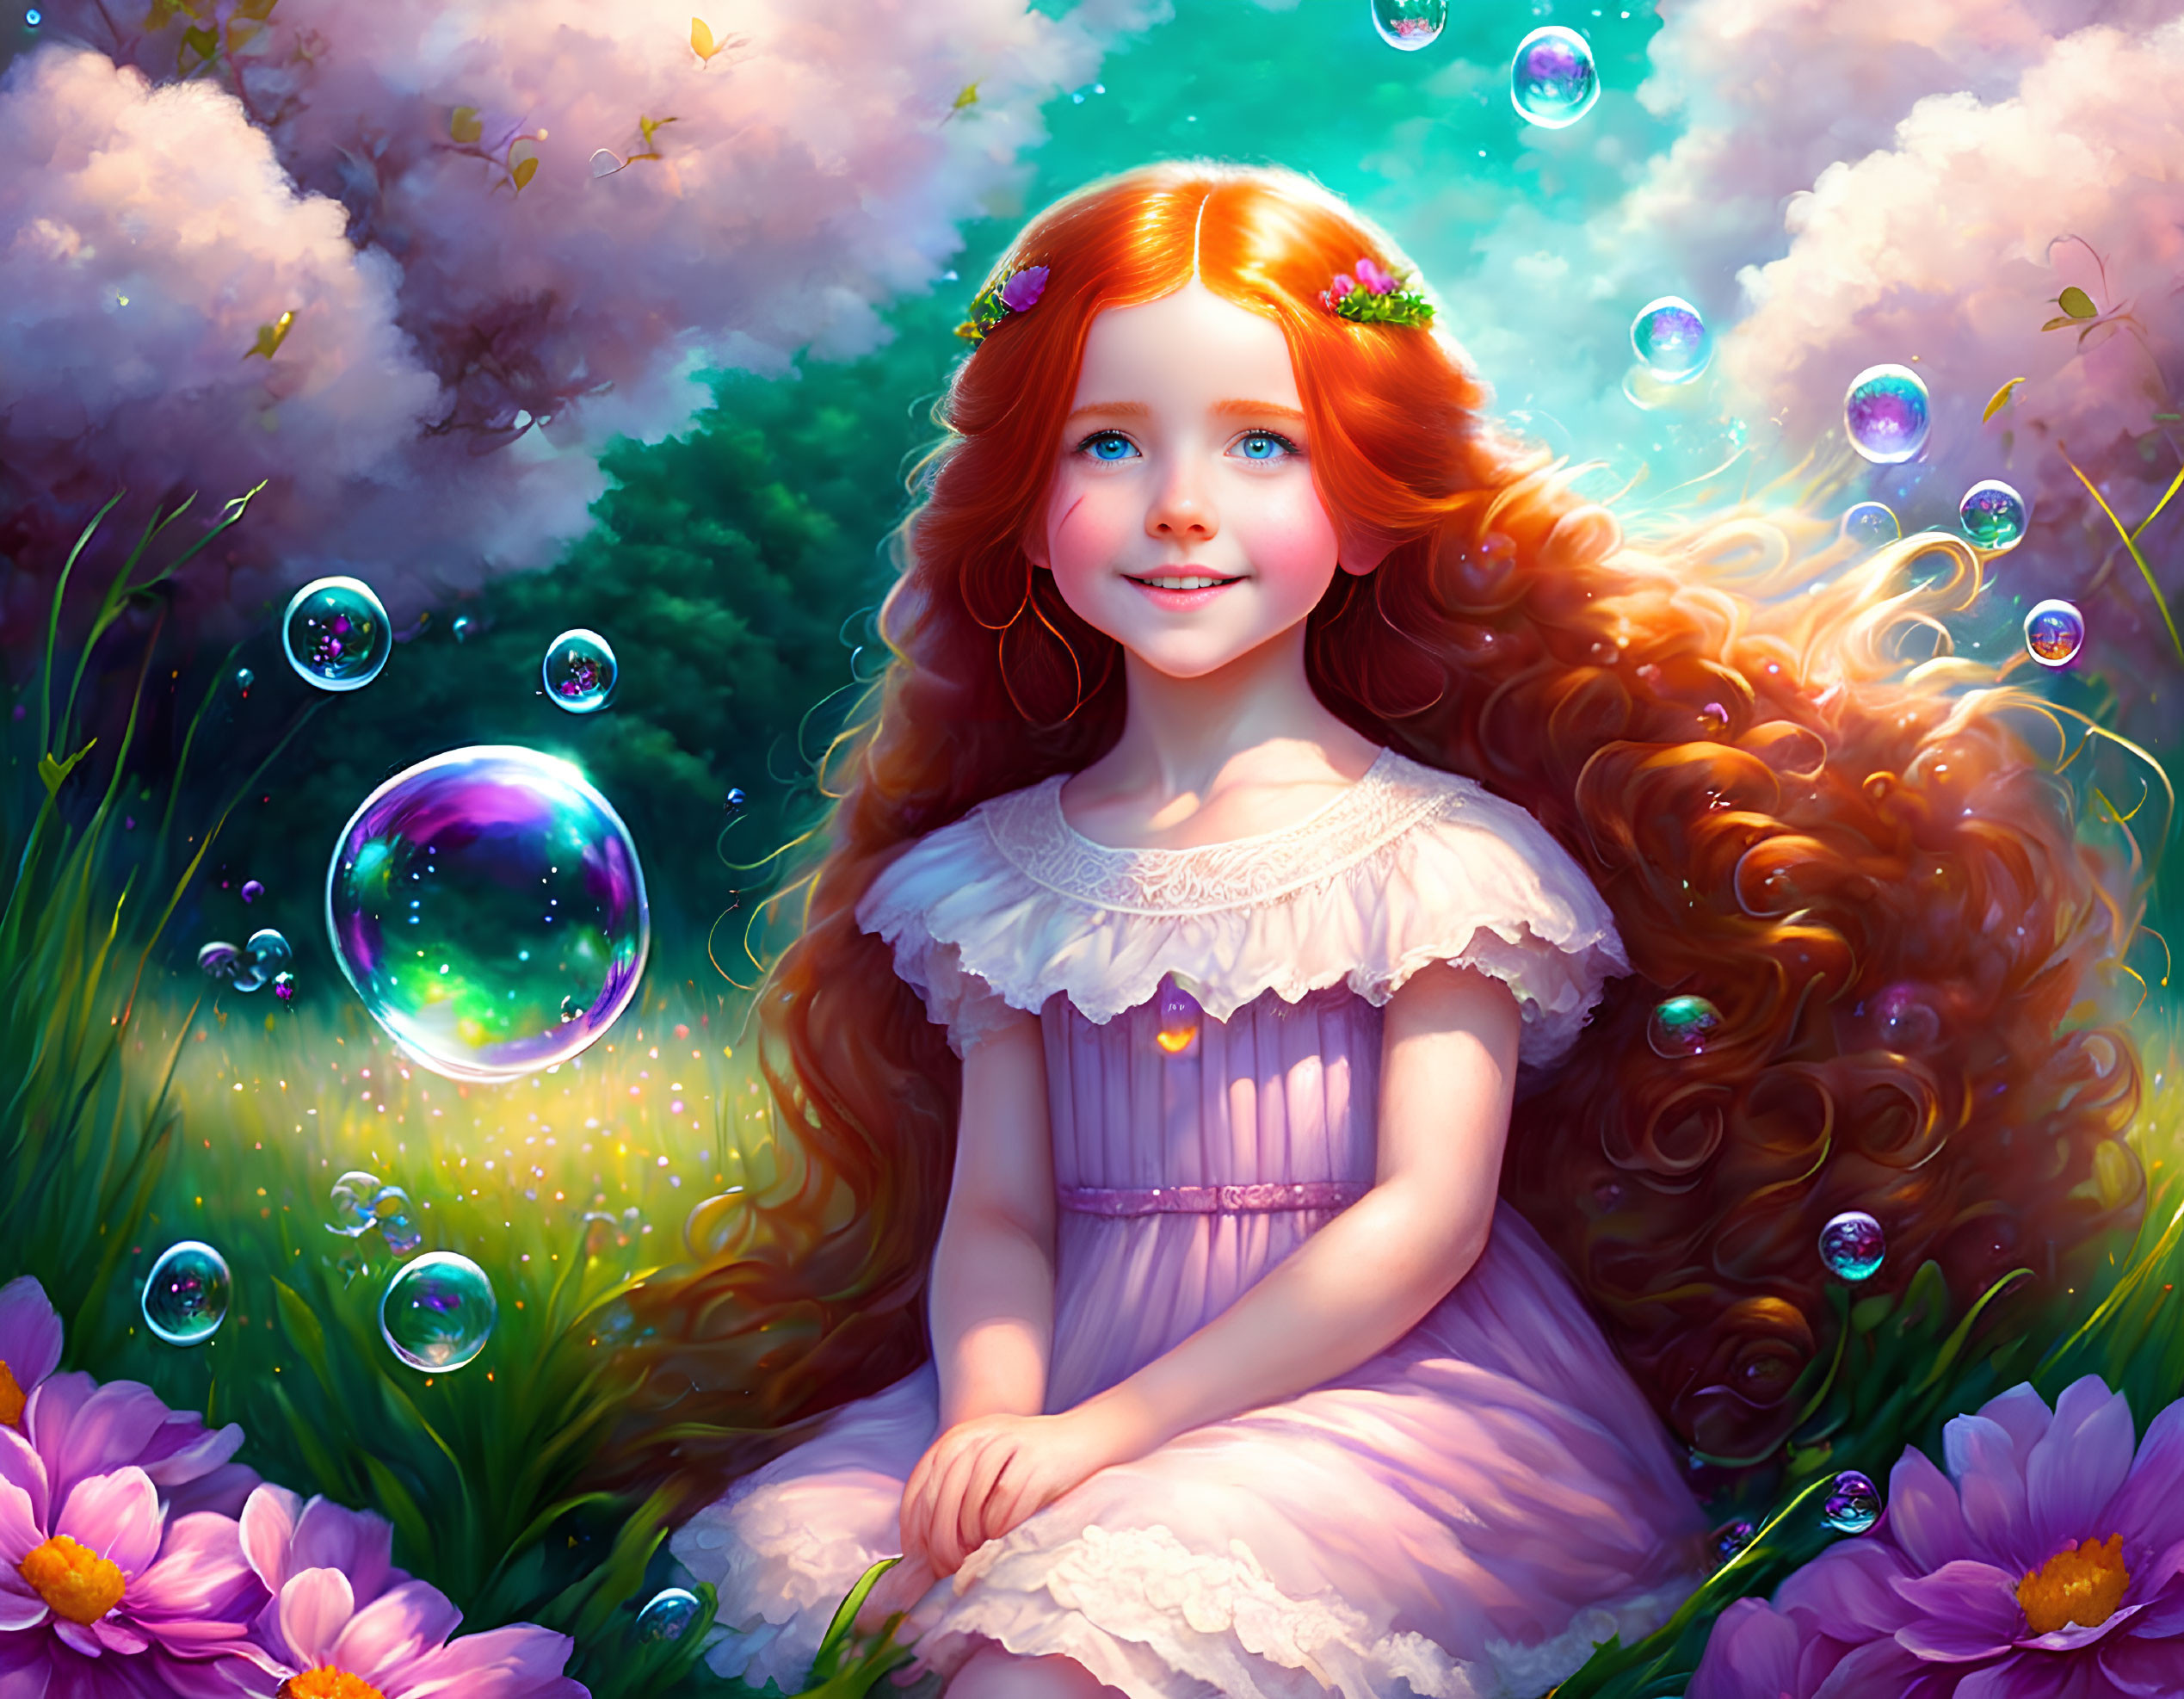 Young girl with red hair and blue eyes in lush greenery with bubbles